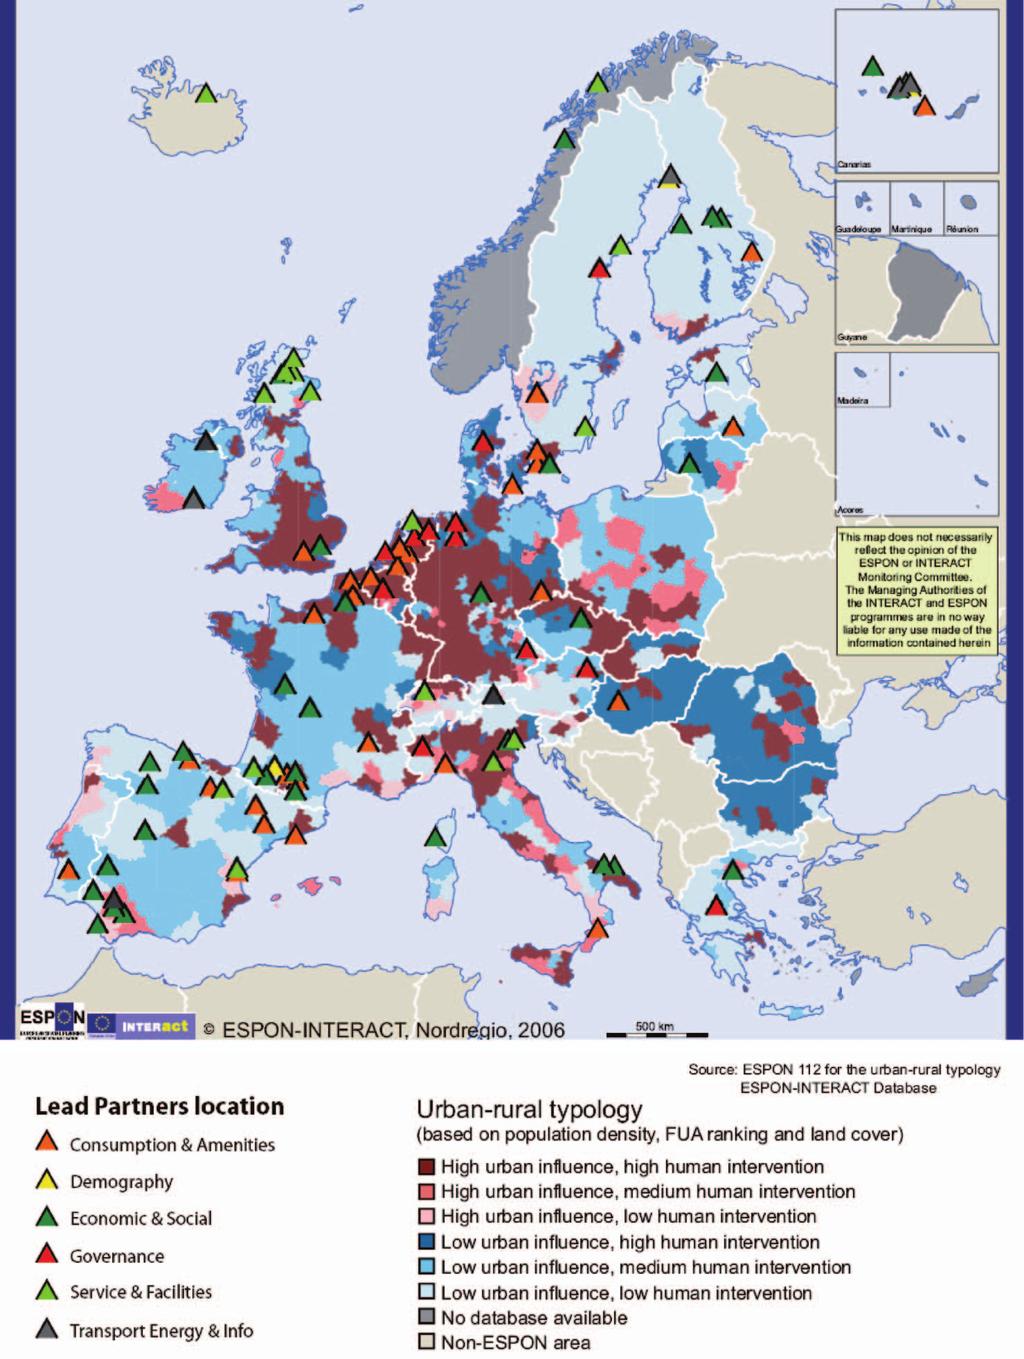 European Territorial Cooperation & Urban Rural Relationships subprojects are of less importance.